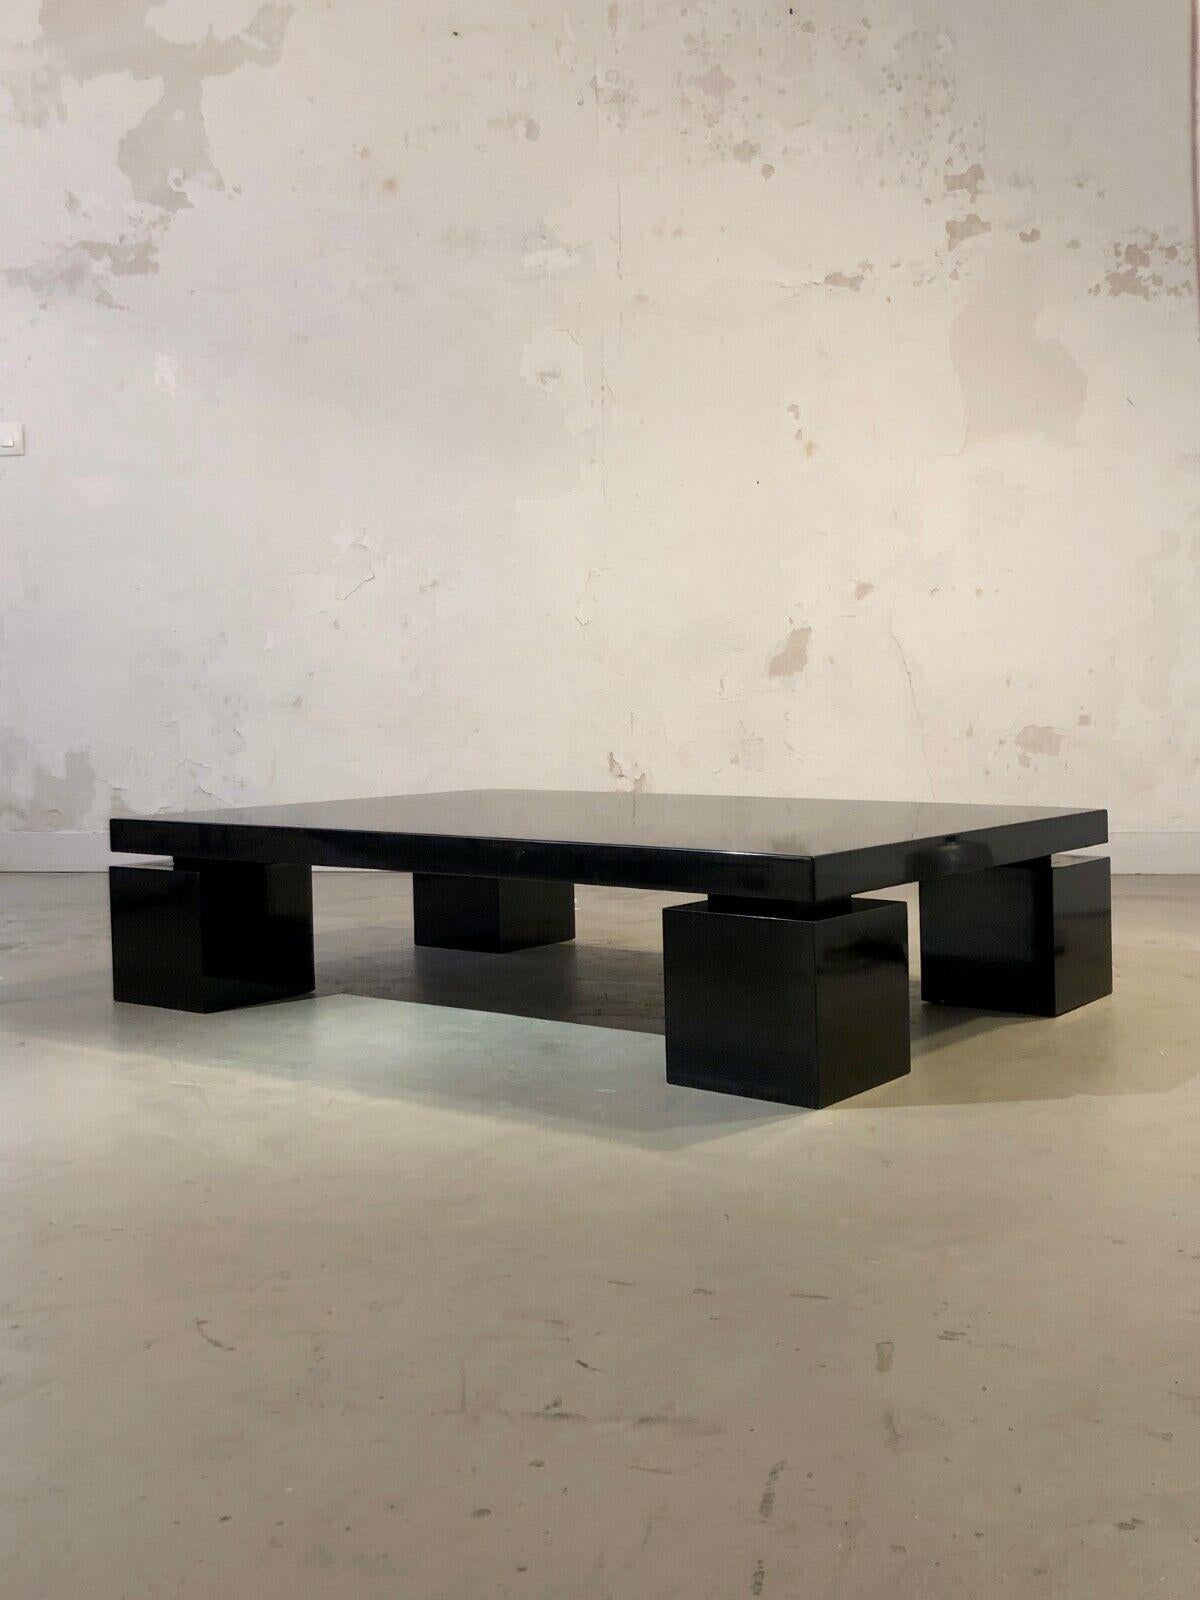 Wood A POST-MODERN Lacquered COFFEE TABLE by WILLY RIZZO, ed. CIDUE, Italy, 1970 For Sale